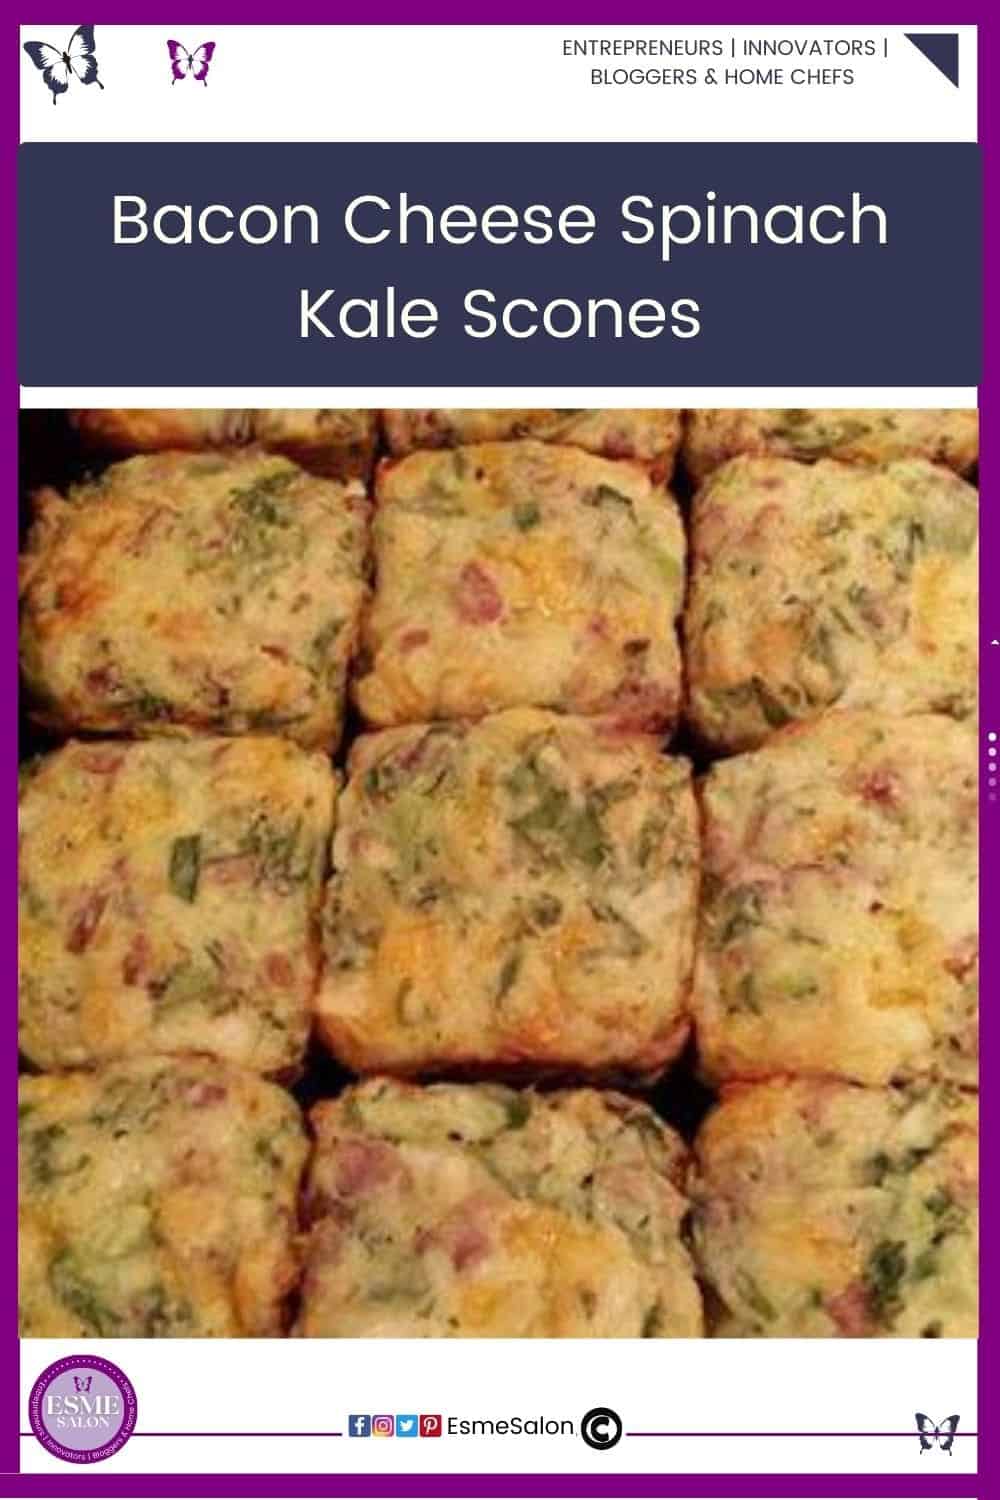 an image of cubes of Bacon Cheese Spinach Kale scones